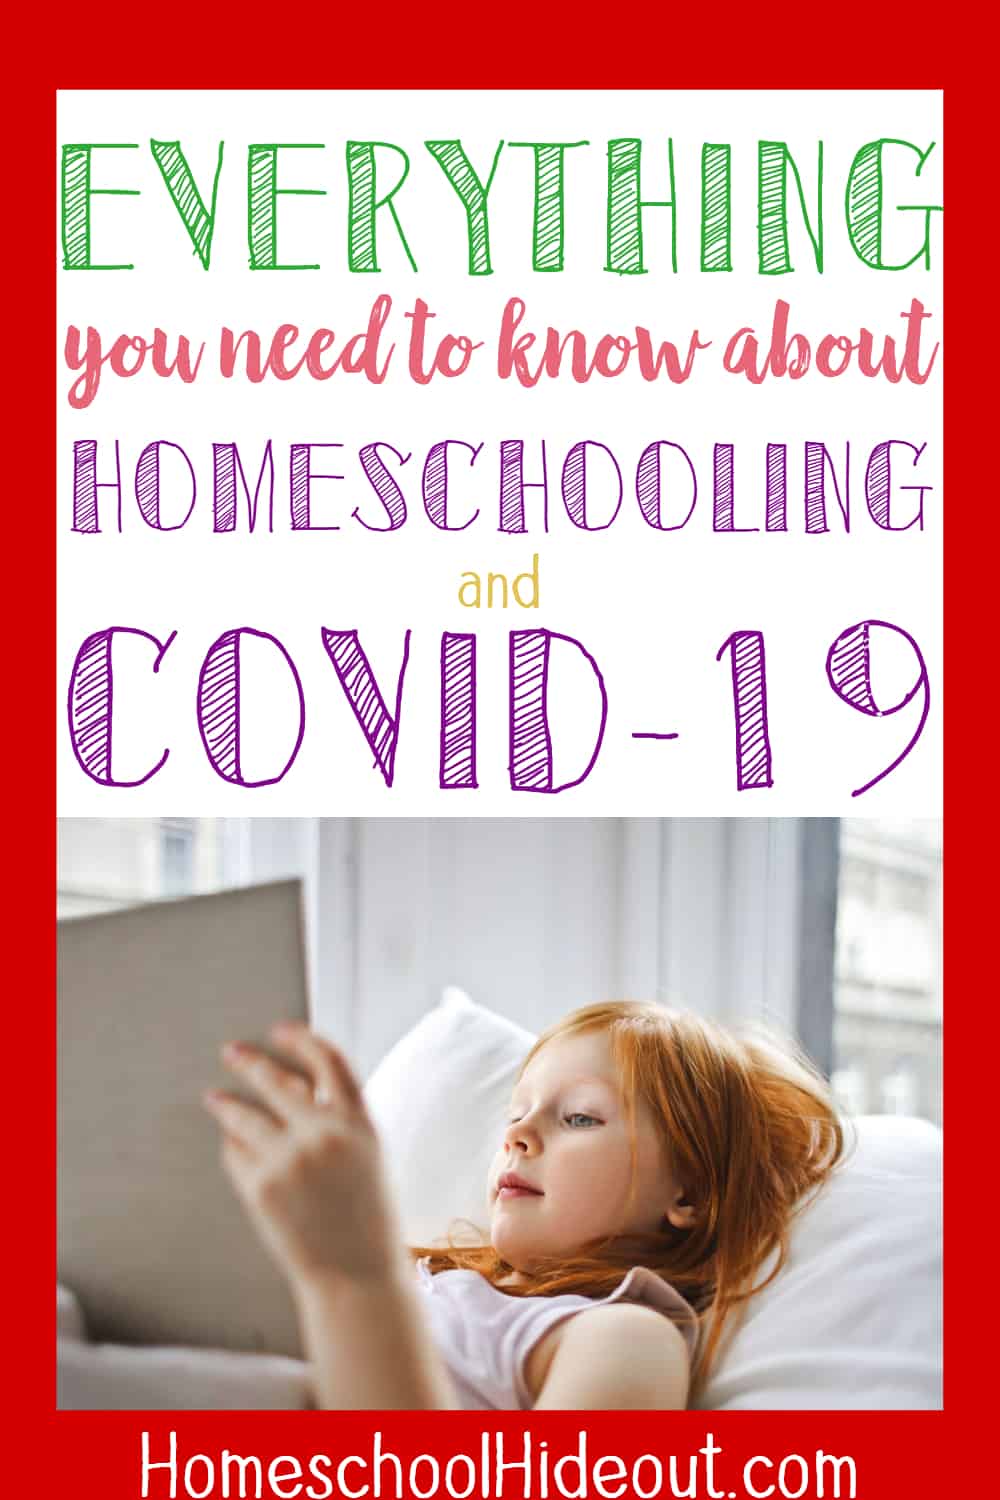 Super helpful tips to help you survive pandemic homeschooling! I would've never thought of some of these things!